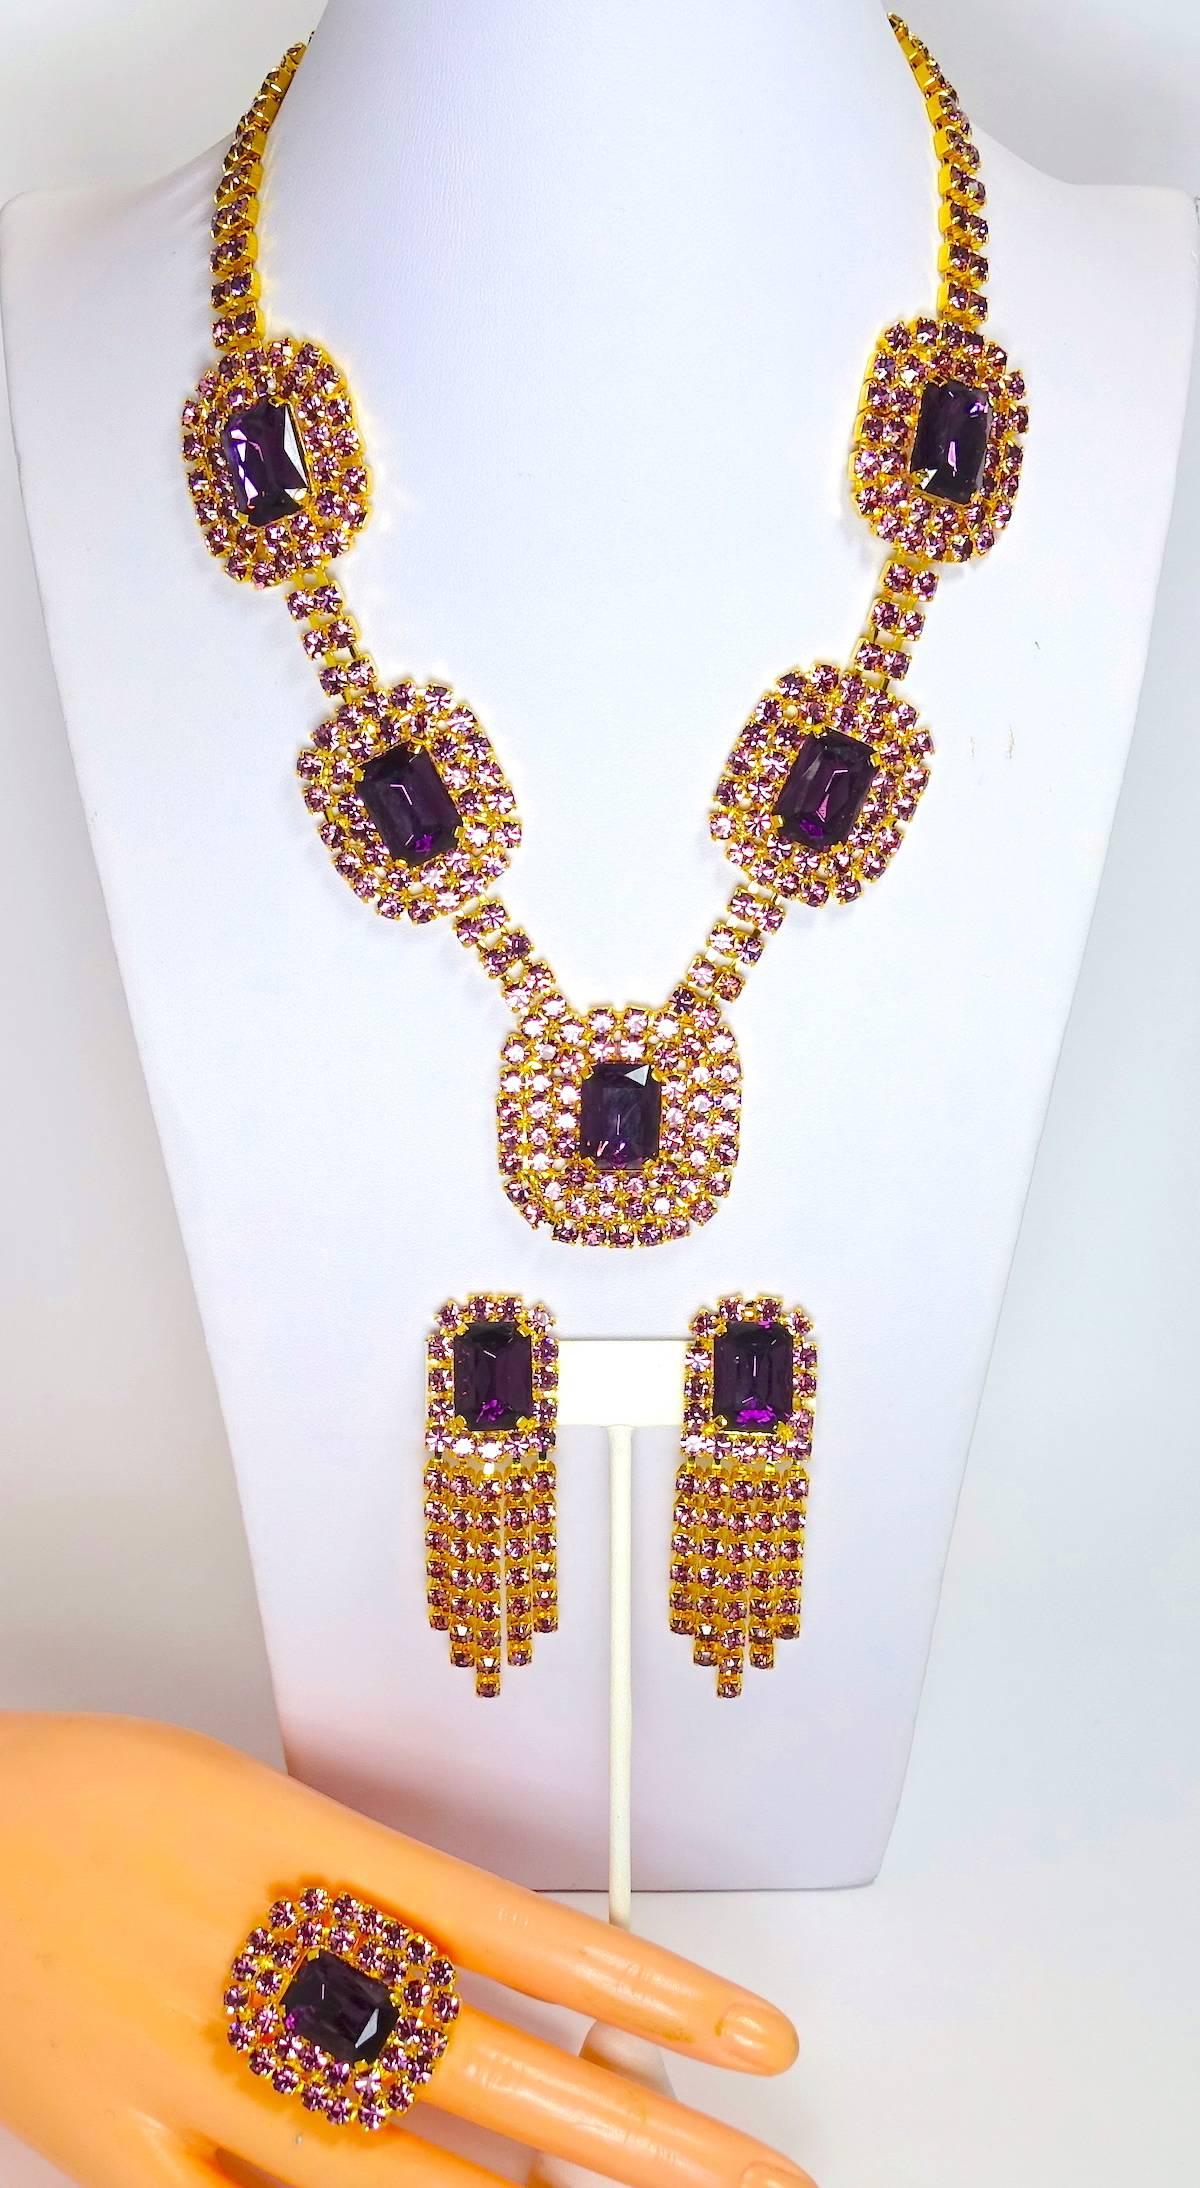 This stunning Czech set features light and dark amethyst color crystals in a gold tone setting.  The necklace measures 21” long x 1-1/8”; the front drop is 1-5/8” x 1-1/2”.  The dangling clip earrings are 2-3/4” x 7/8”. The ring is adjustable up to